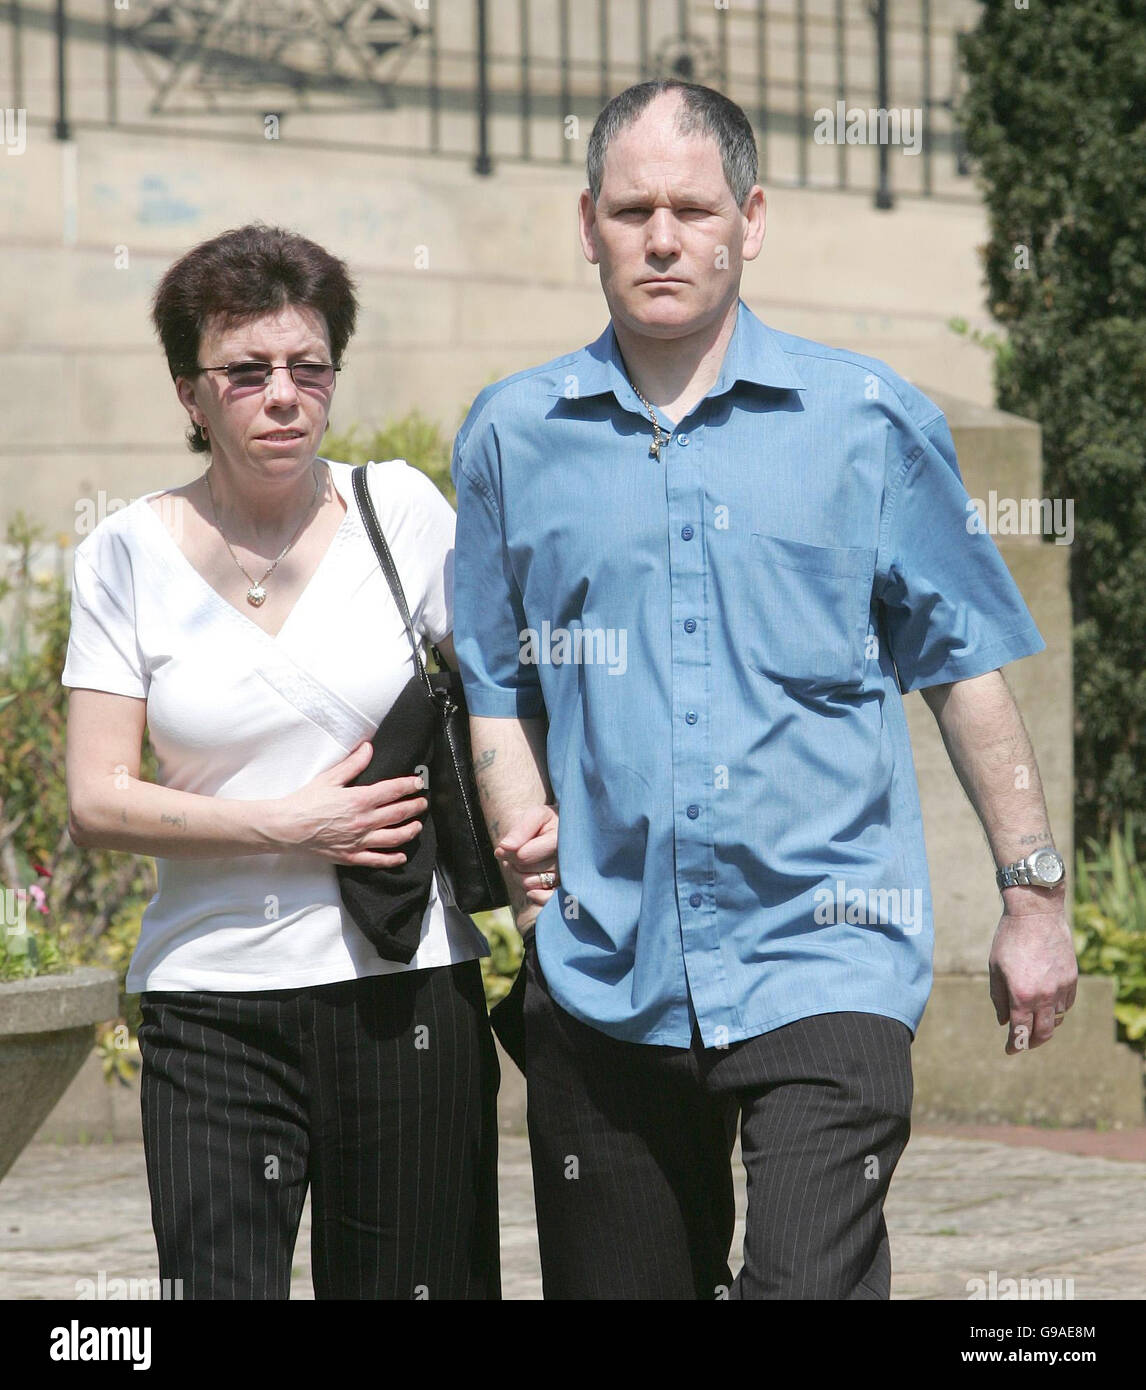 George Jackson, 44, arrives at Burnley Magistrates Court with his wife where he is accused of shouting racist abuse at Wolverhampton Wanderers footballer Paul Ince. Stock Photo